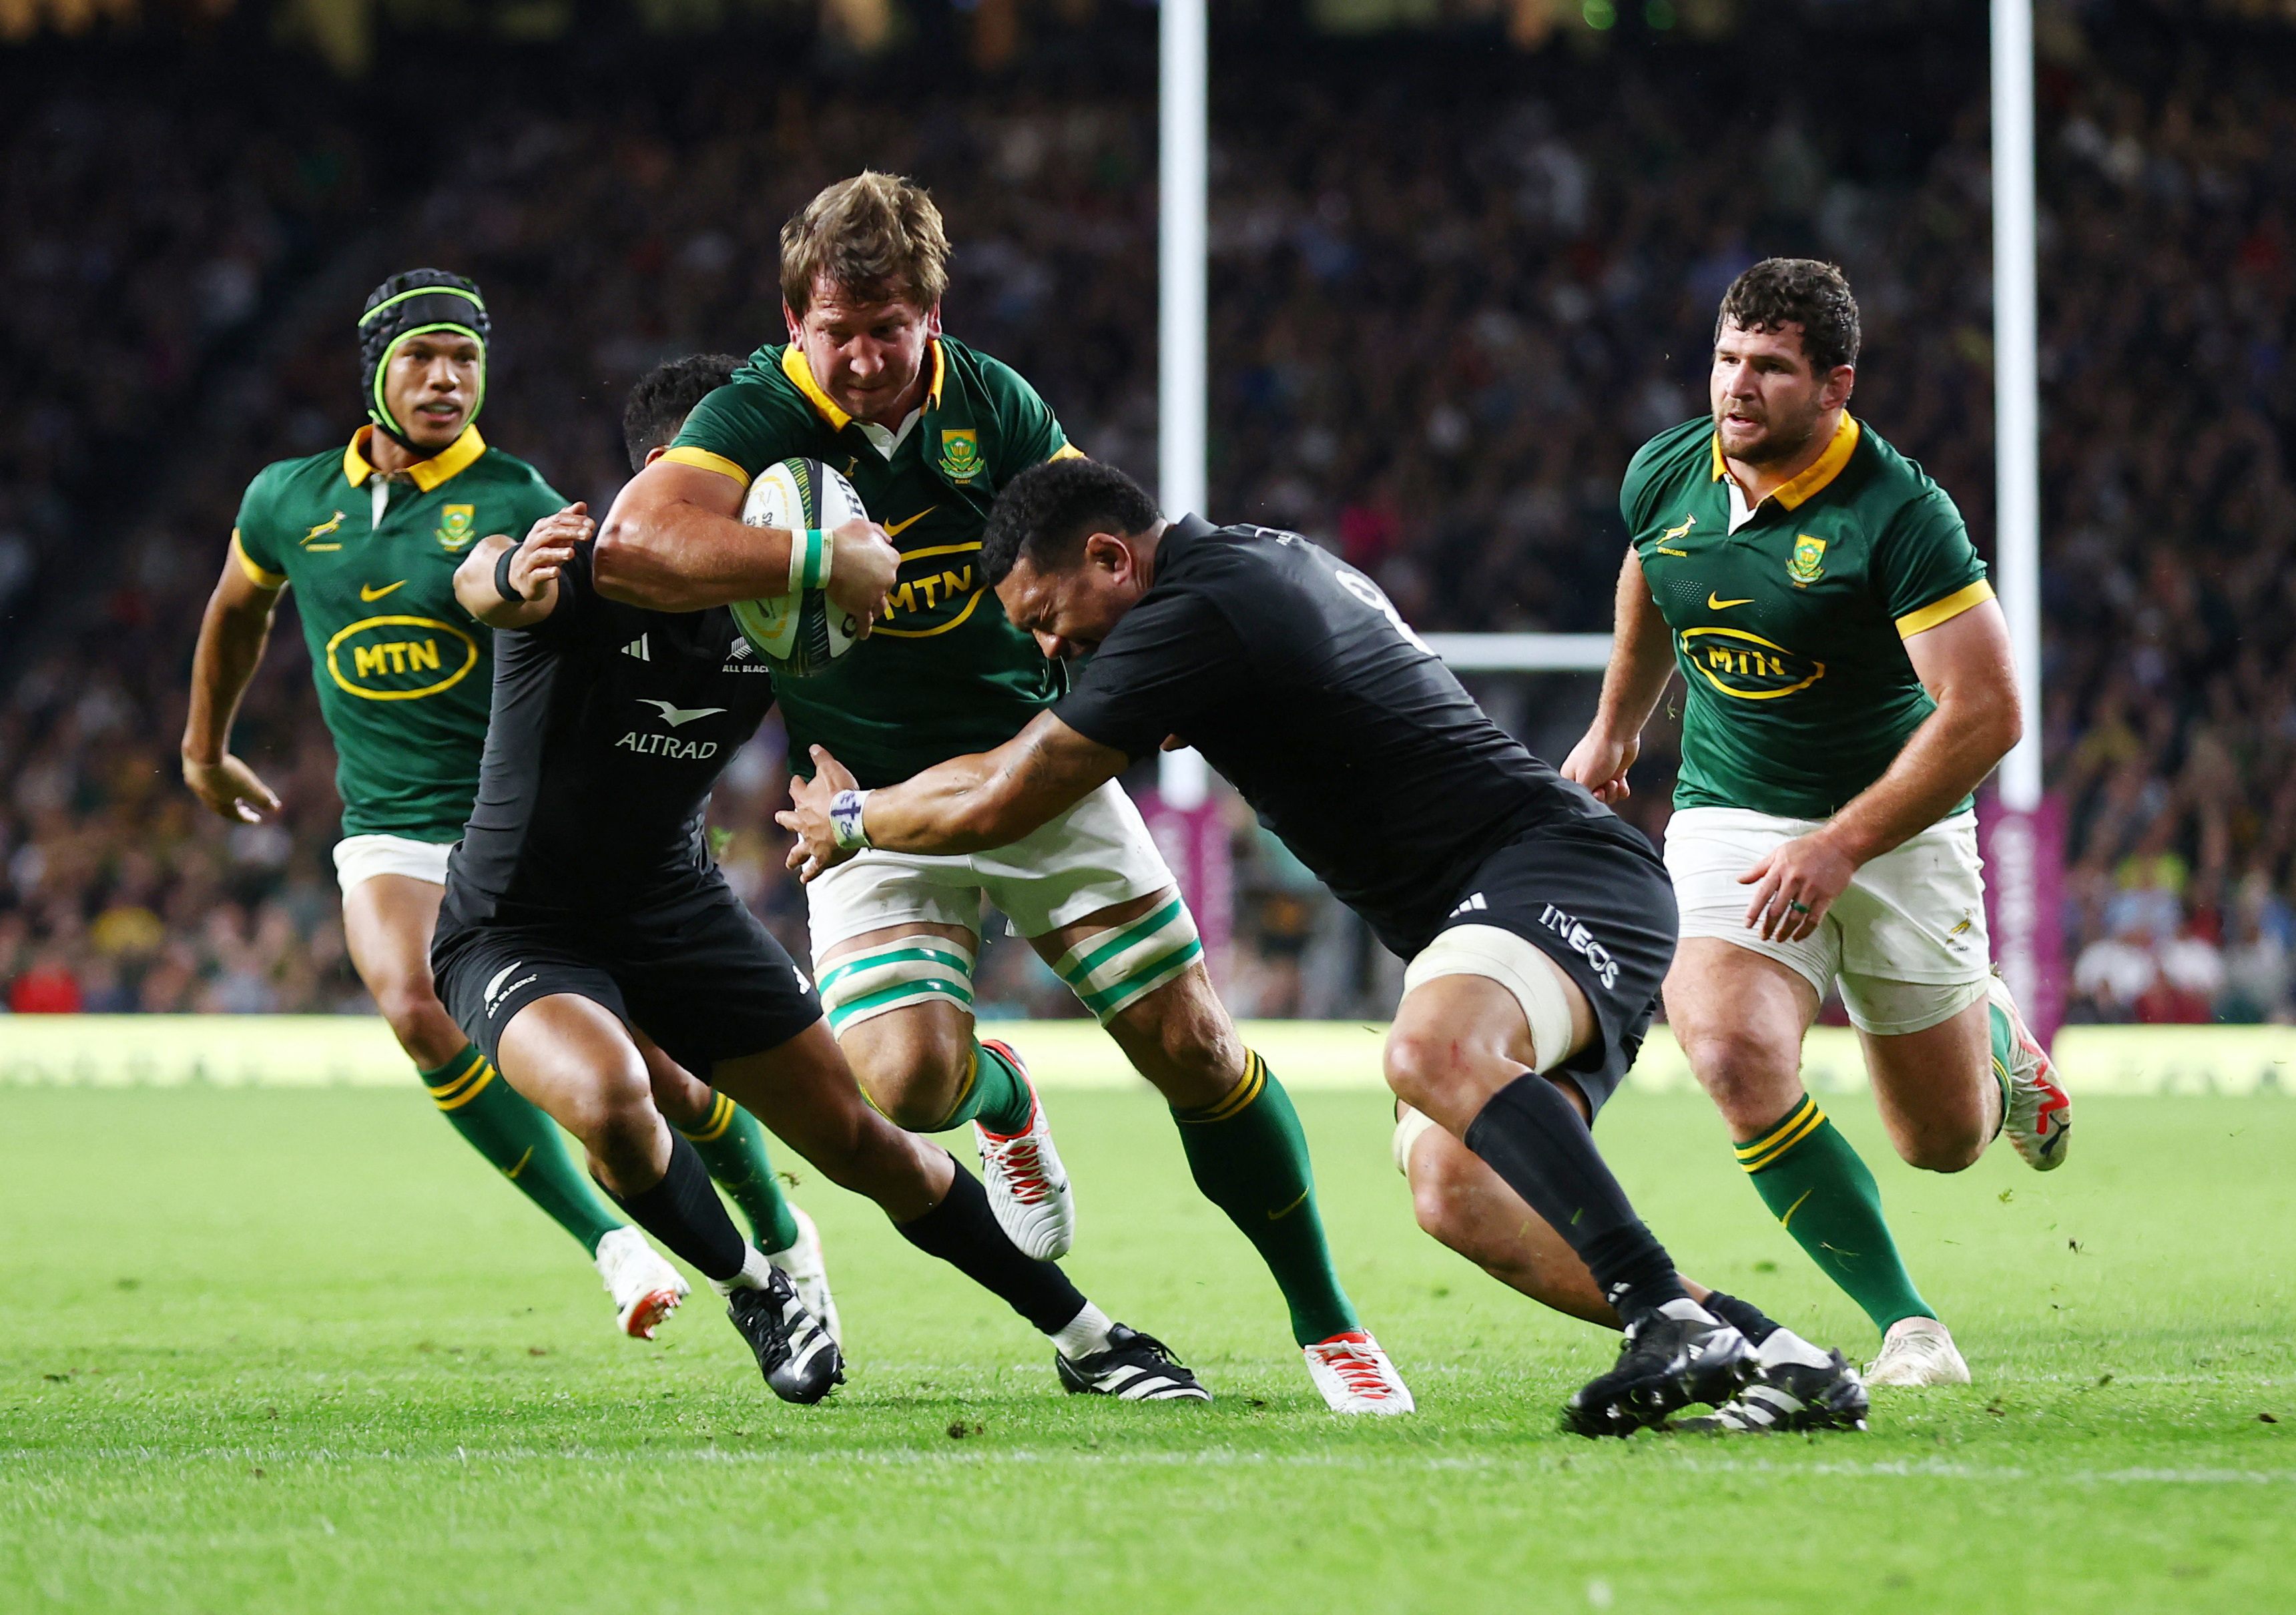 Springboks inflict heaviest ever defeat on New Zealand with 35-7 win Reuters